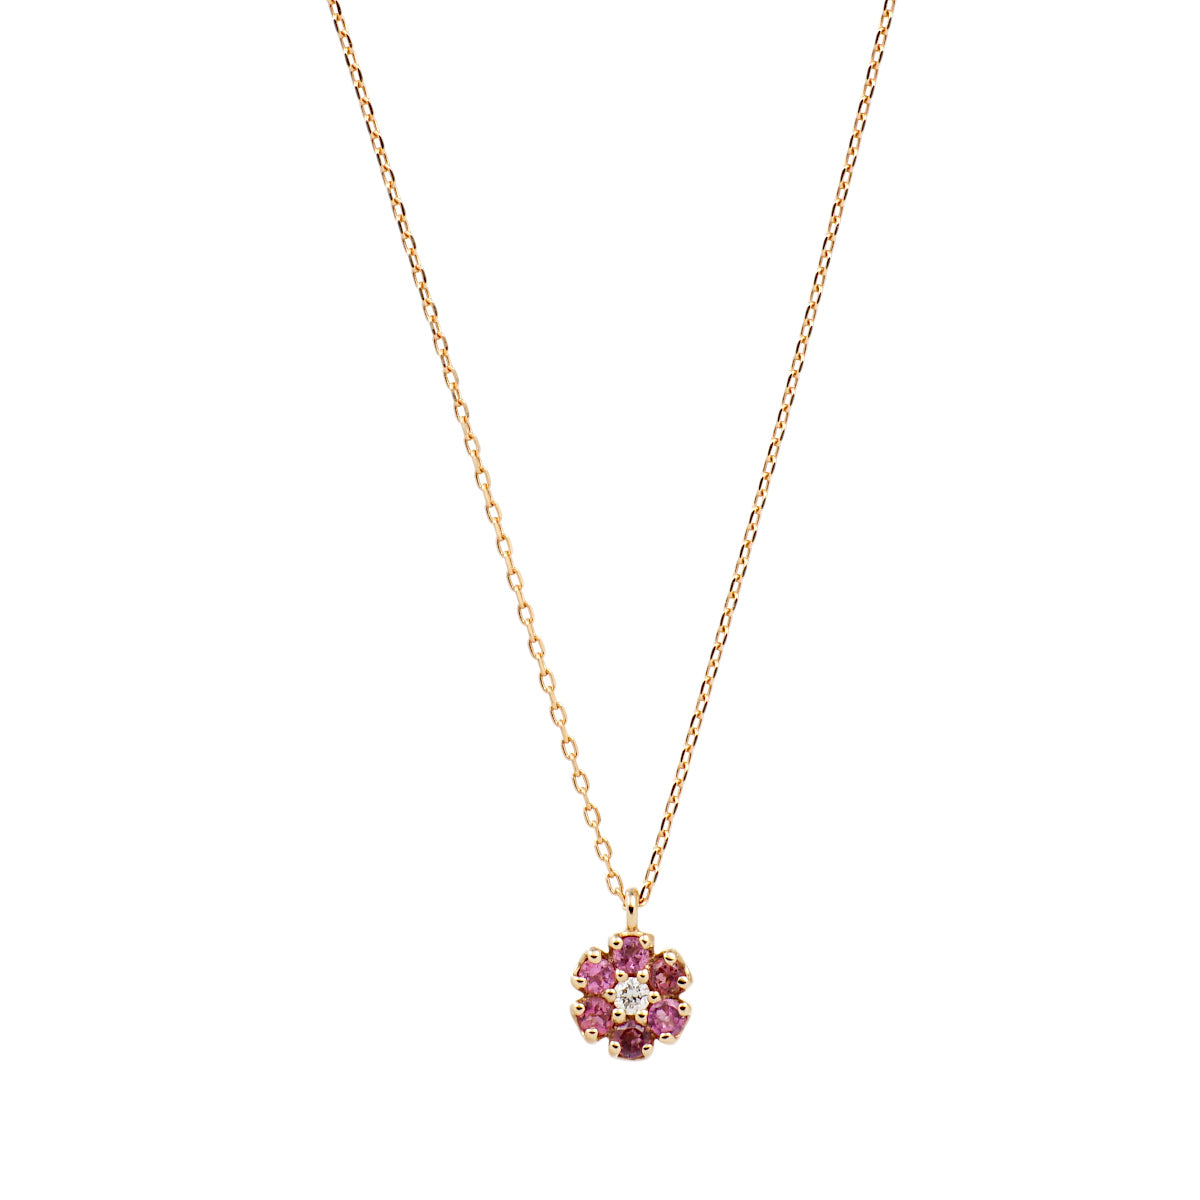 [LuxUness]  PonteVecchio Flower Motif Reversible Necklace with D0.1ct in K18 Pink Gold - Diamond x Pink Tourmaline, Ladies, Ponte Vecchio [Preloved] J1956 in Excellent condition